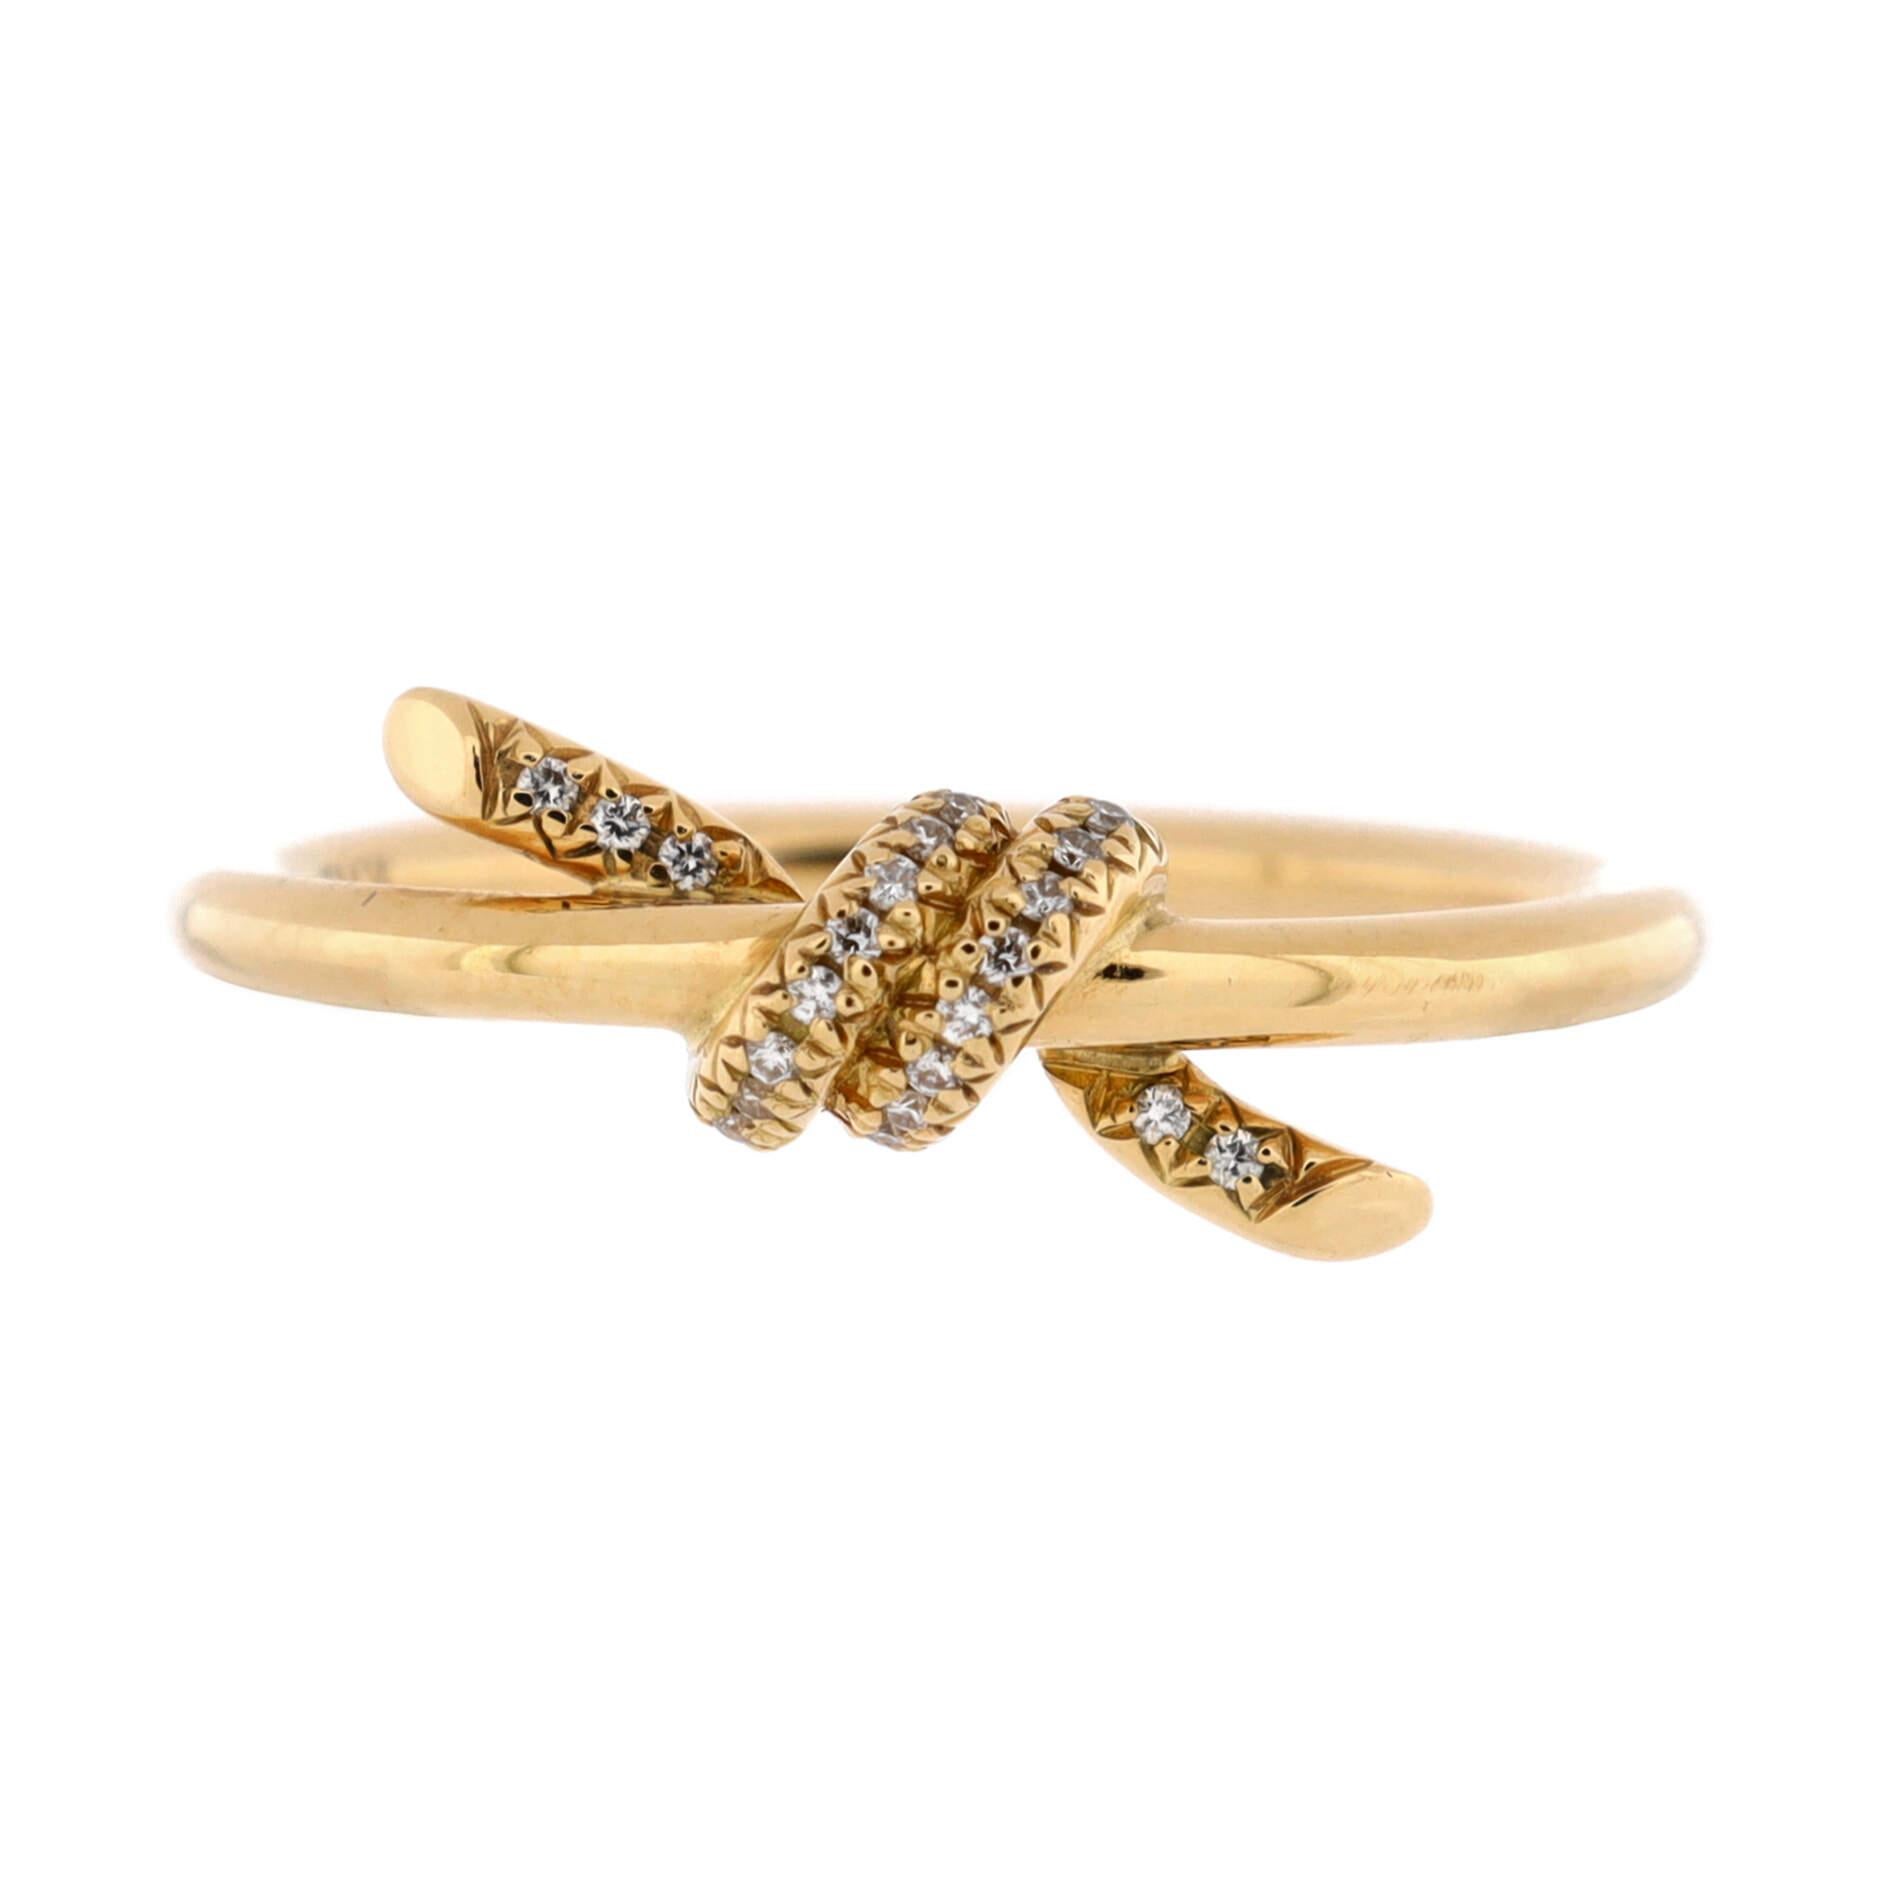 Condition: Great. Minor wear throughout.
Accessories: No Accessories
Measurements: Size: 5.5, Width: 1.80 mm
Designer: Tiffany & Co.
Model: Knot Ring 18K Yellow Gold with Diamonds
Exterior Color: Yellow Gold
Item Number: 217332/2